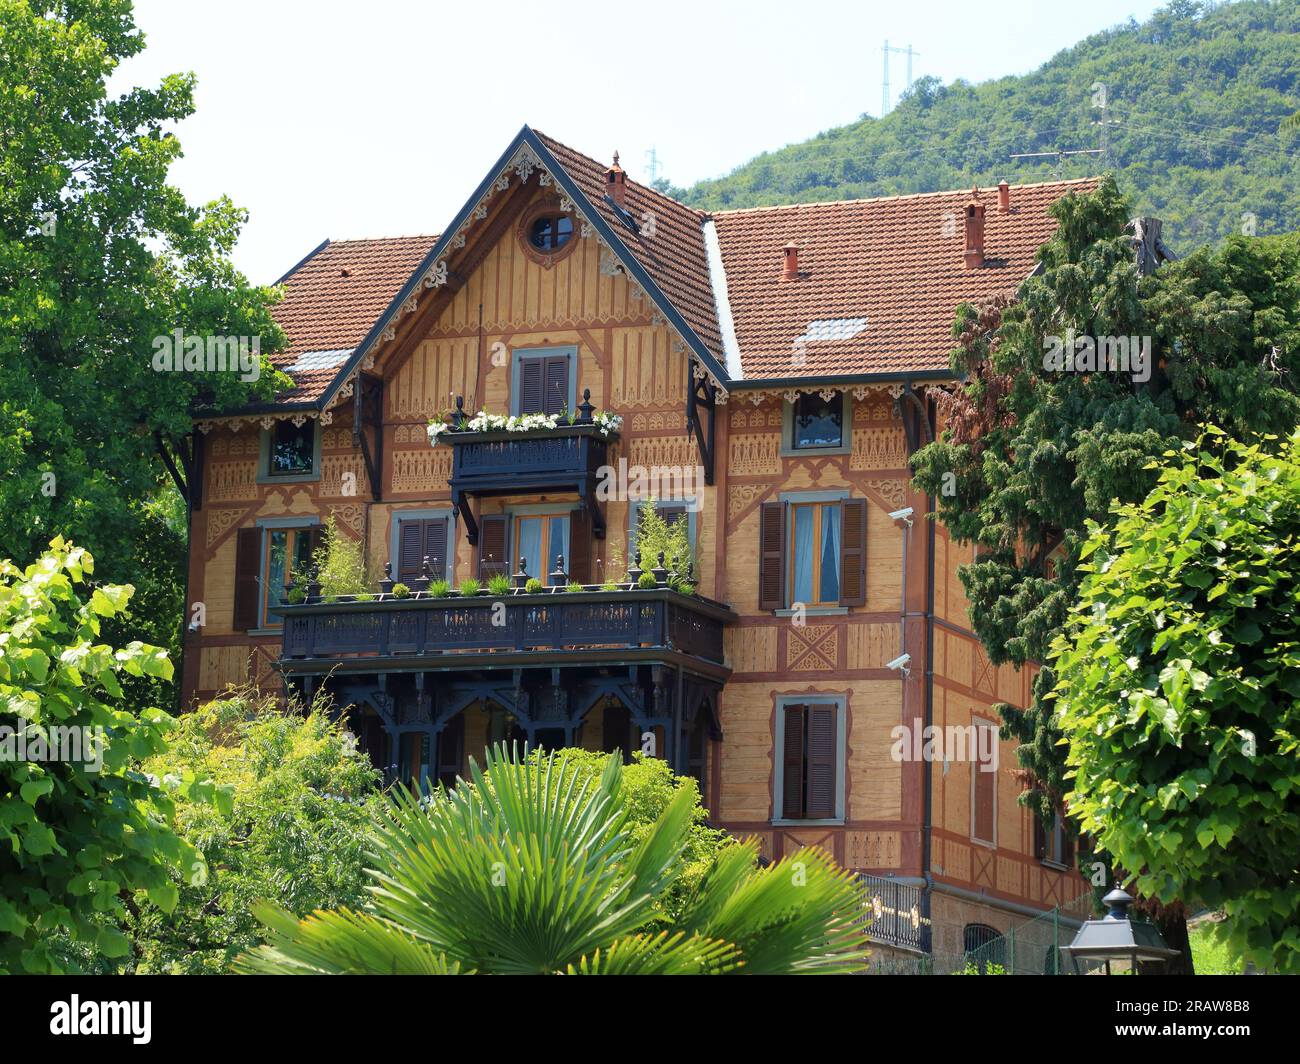 Lake Iseo, Villa in Lovere town. Lago d'Iseo, Iseosee, Italy Stock Photo